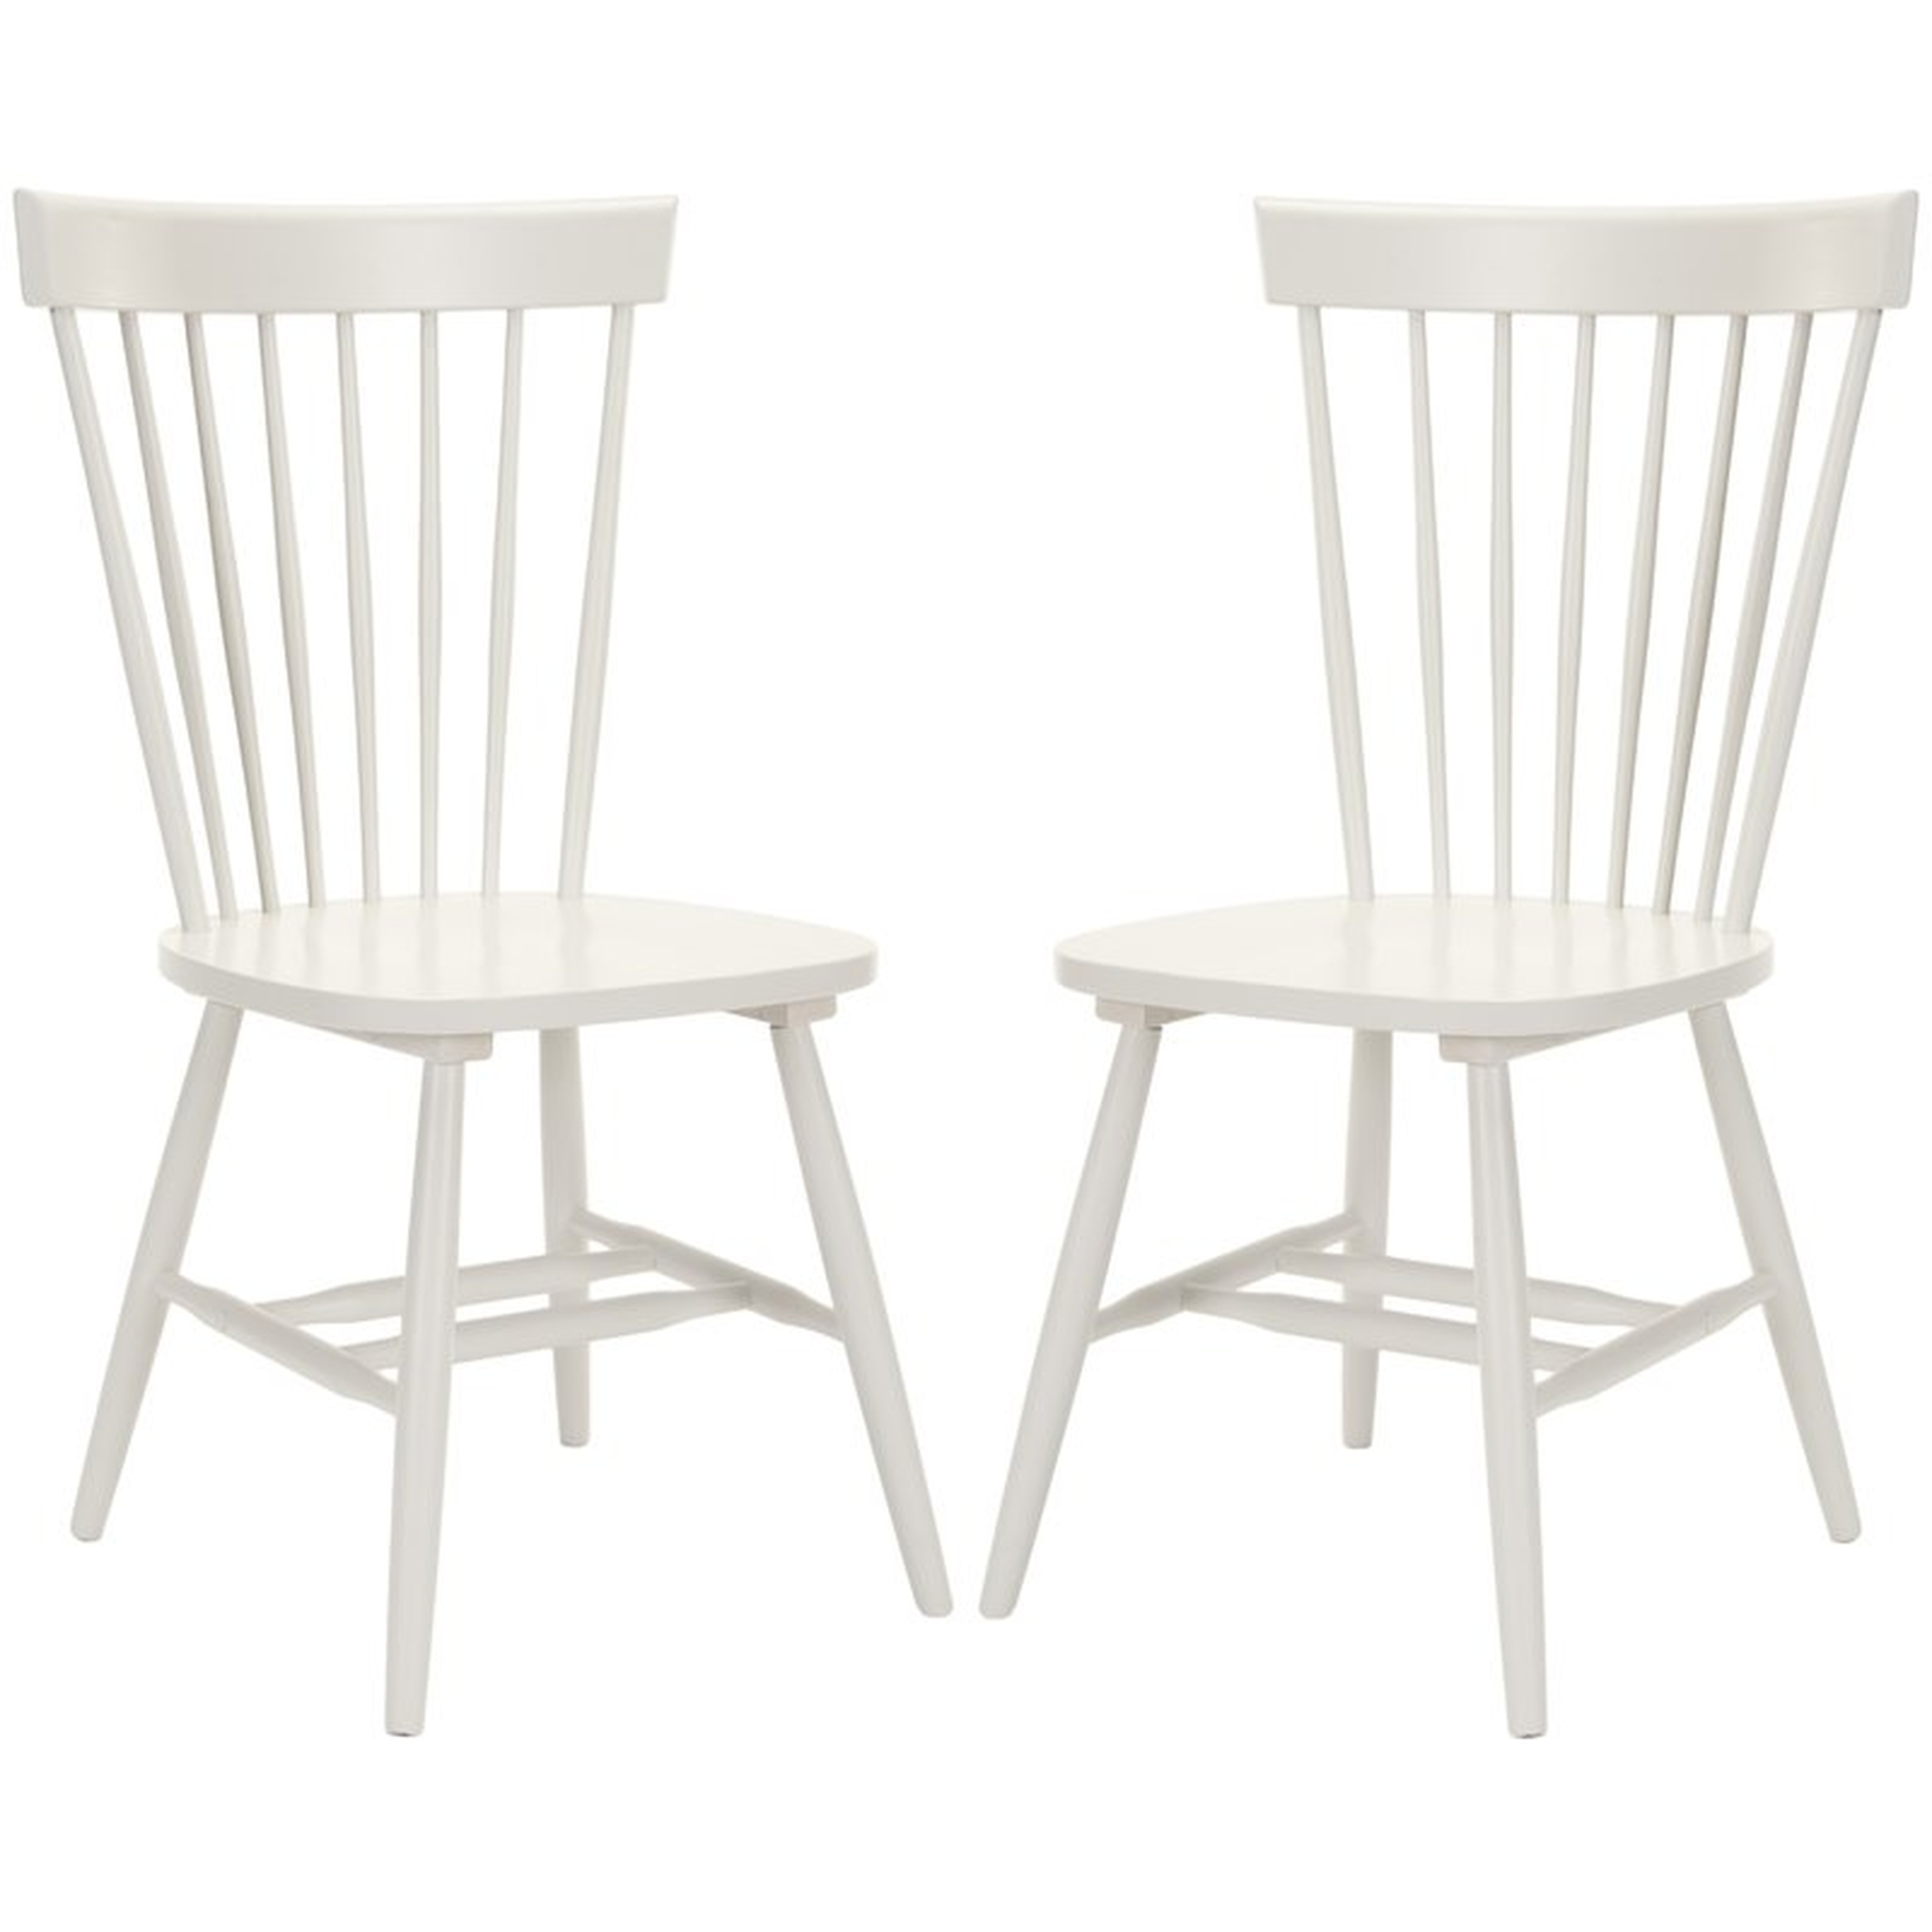 Valdosta Solid Wood Dining Chair off-white set of two - AllModern